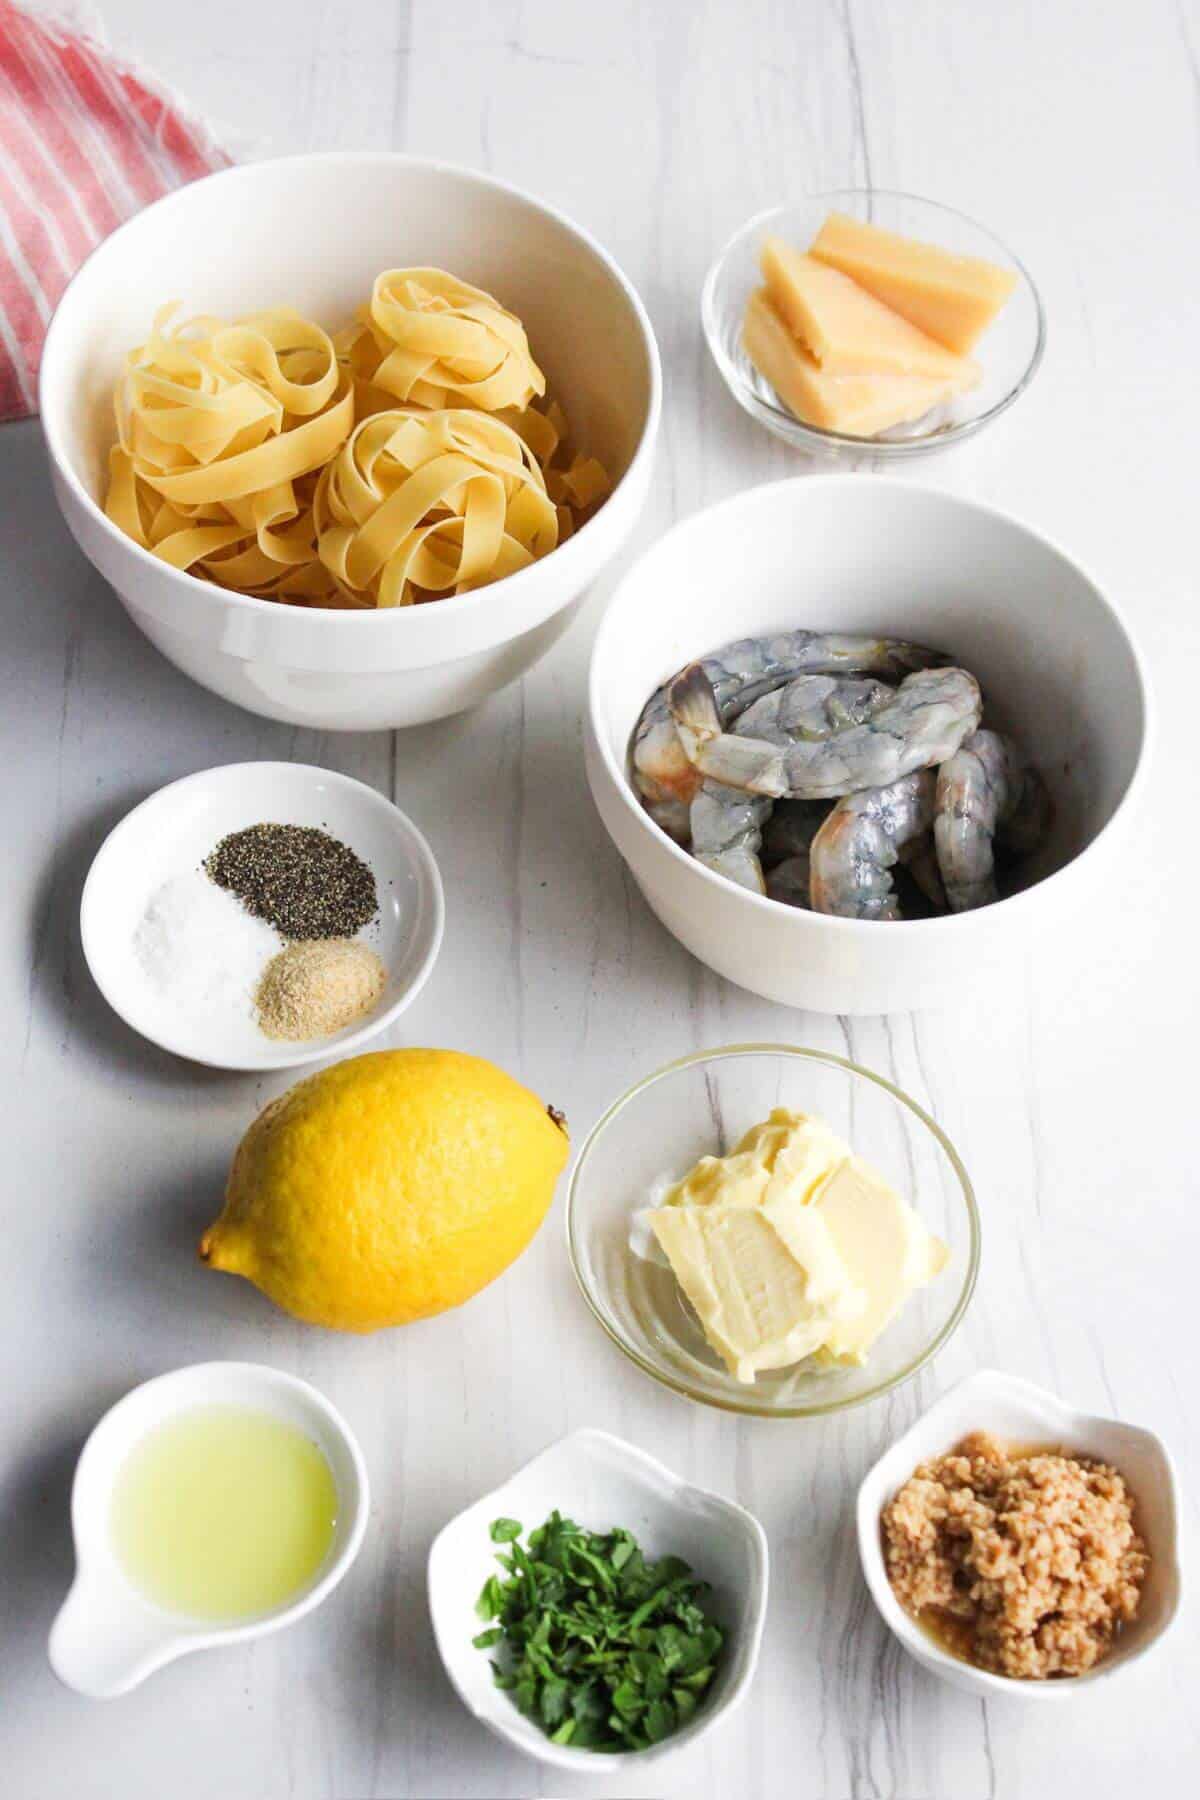 Ingredients for pasta with shrimp and lemon.